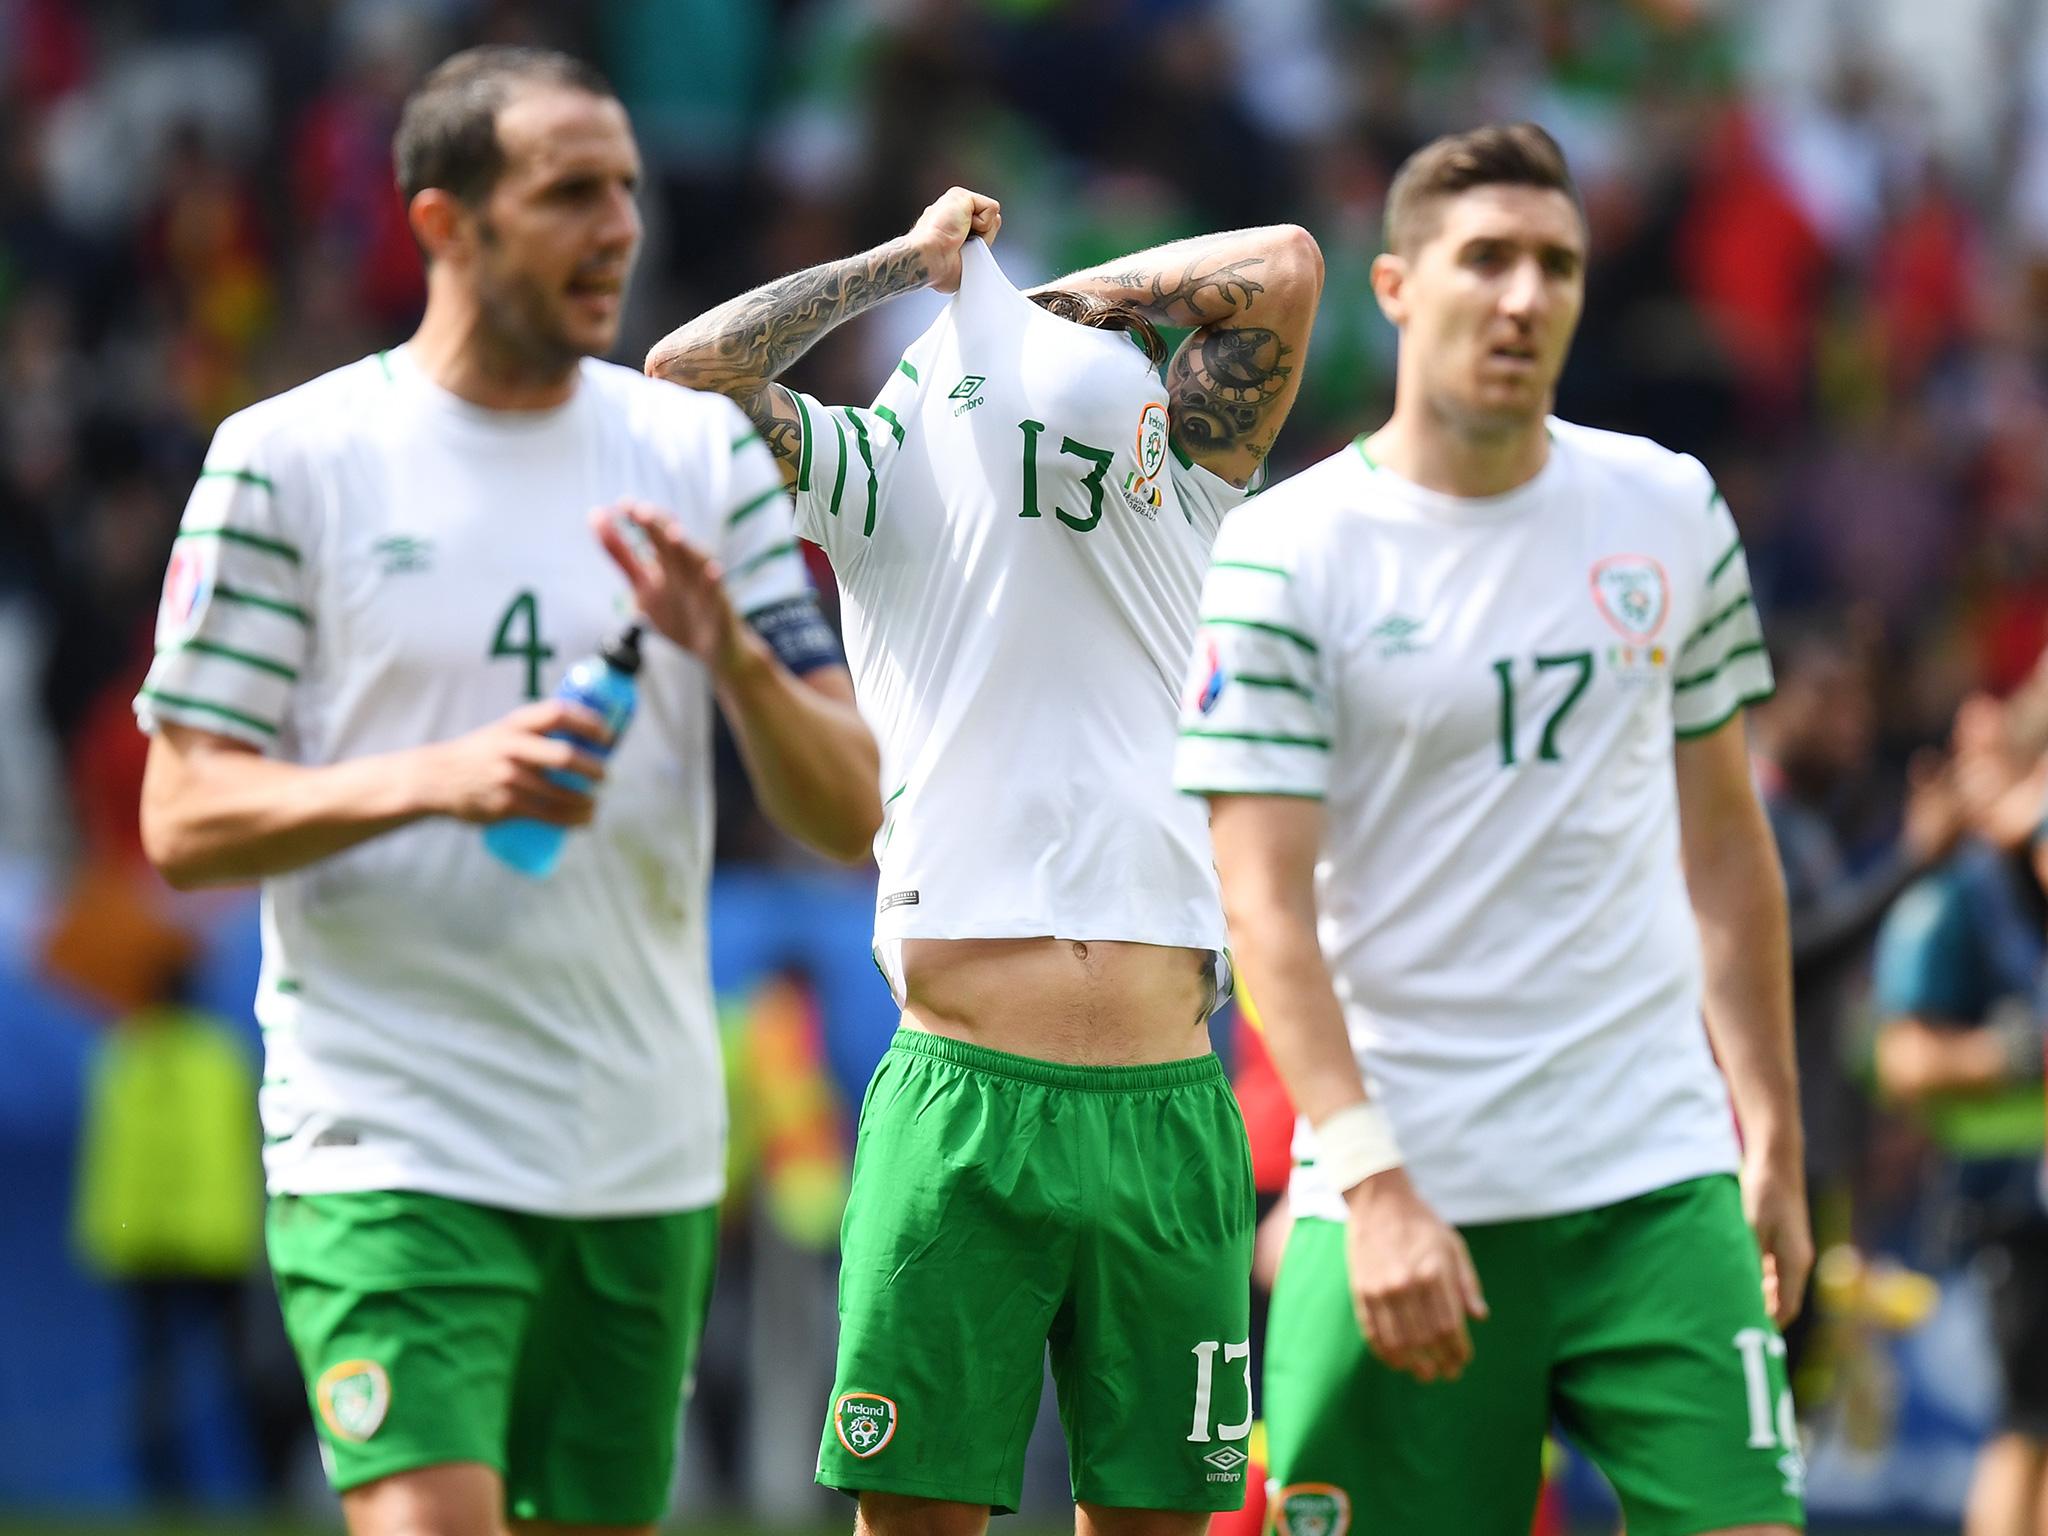 Ireland were soundly beaten in Bordeaux by a clinical Belgium